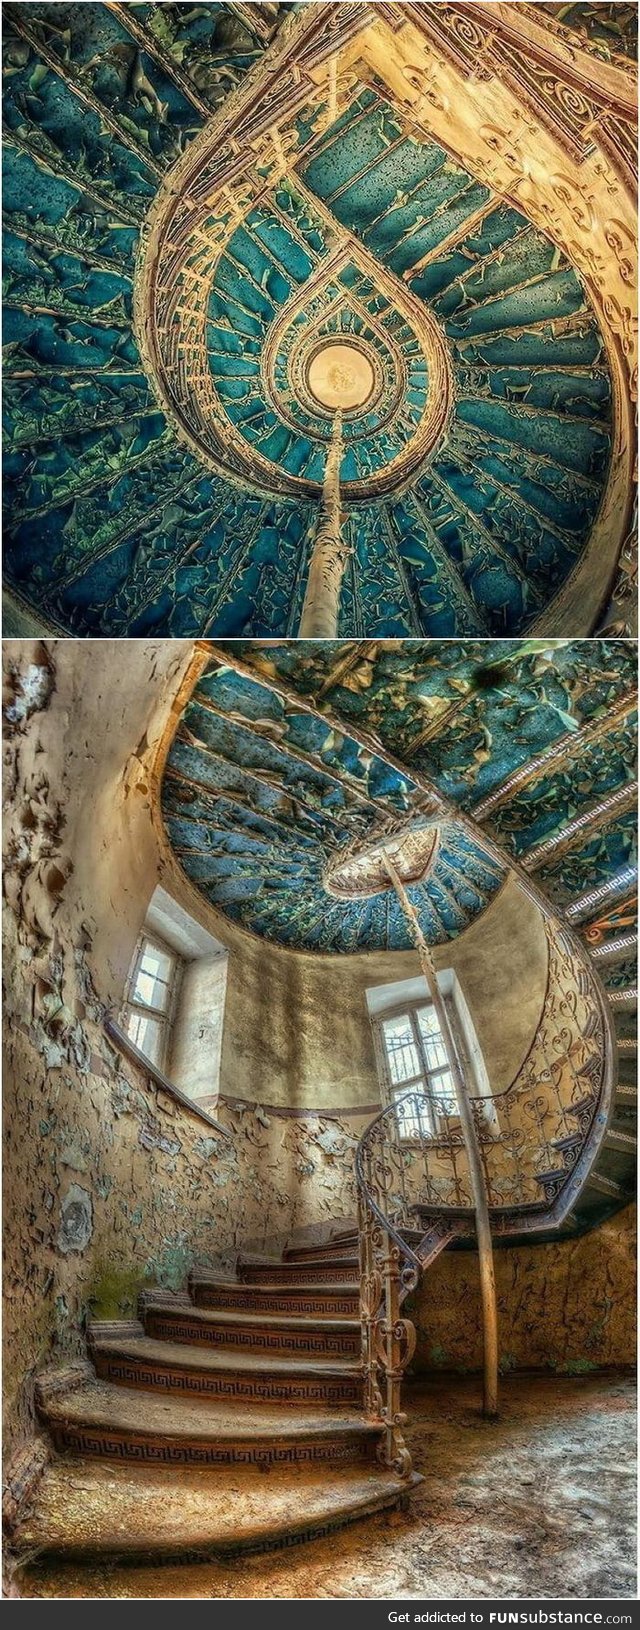 In an old abandoned house in Poland